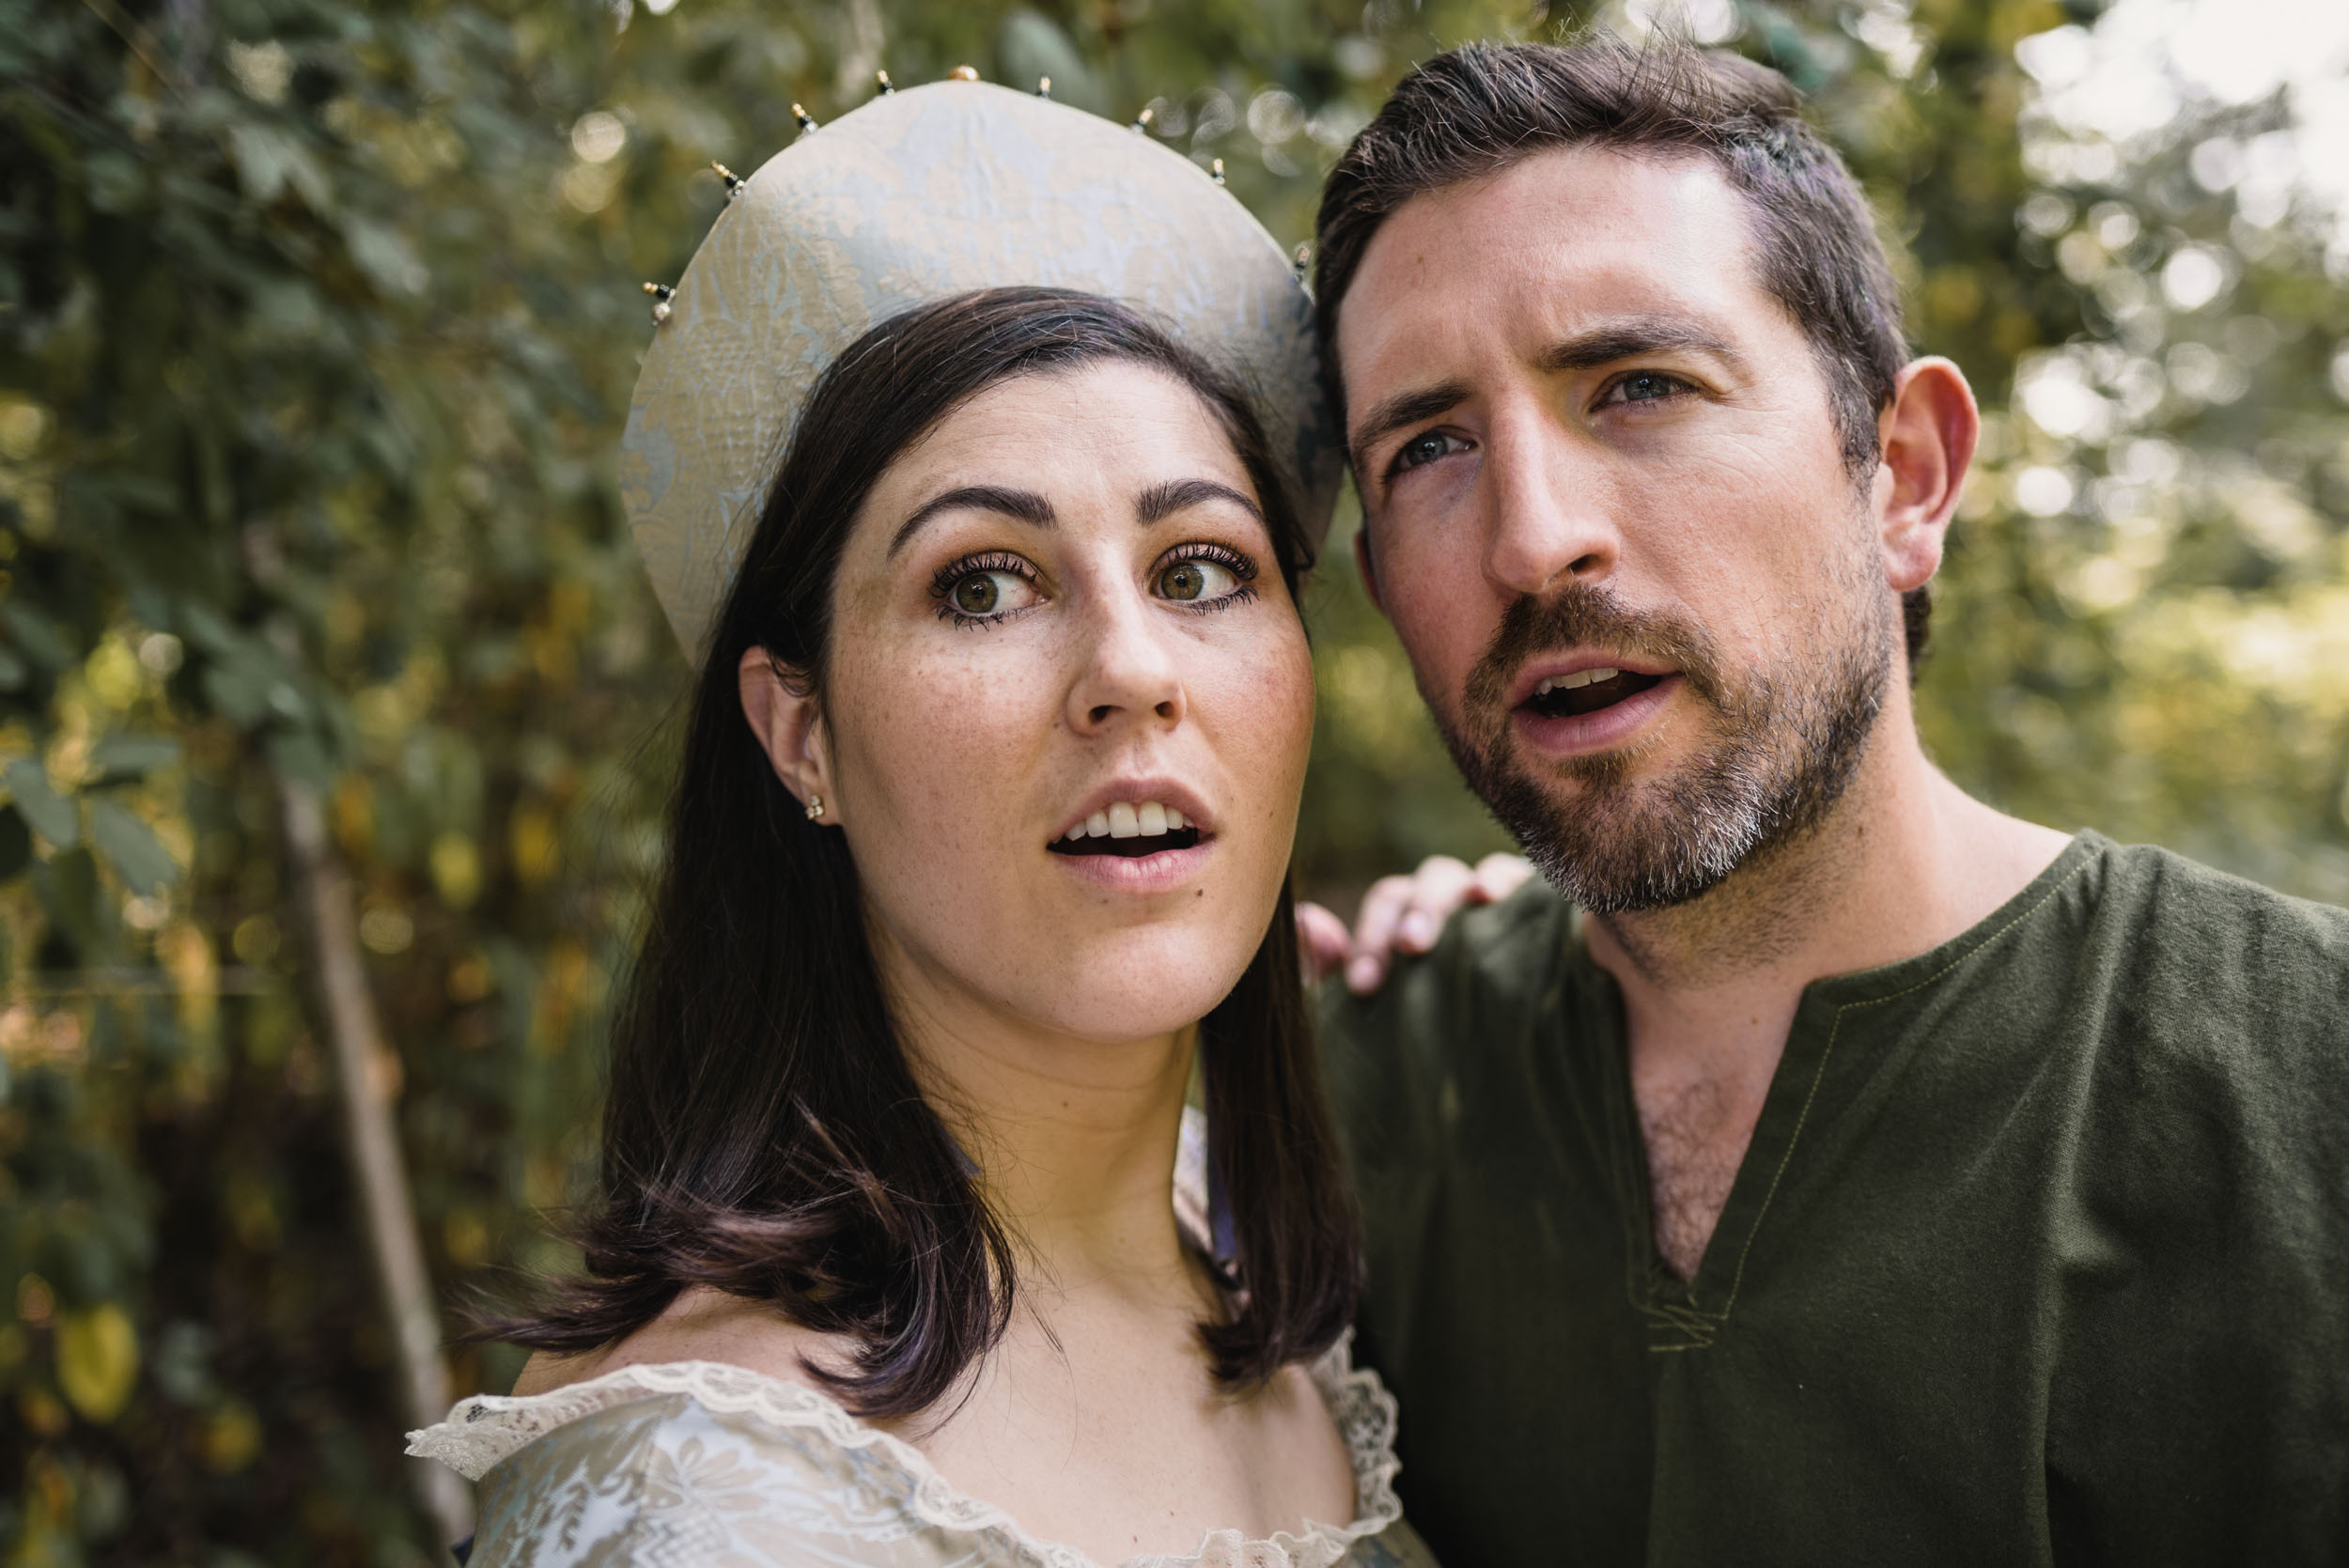 Shocked looking couple with medieval costumes